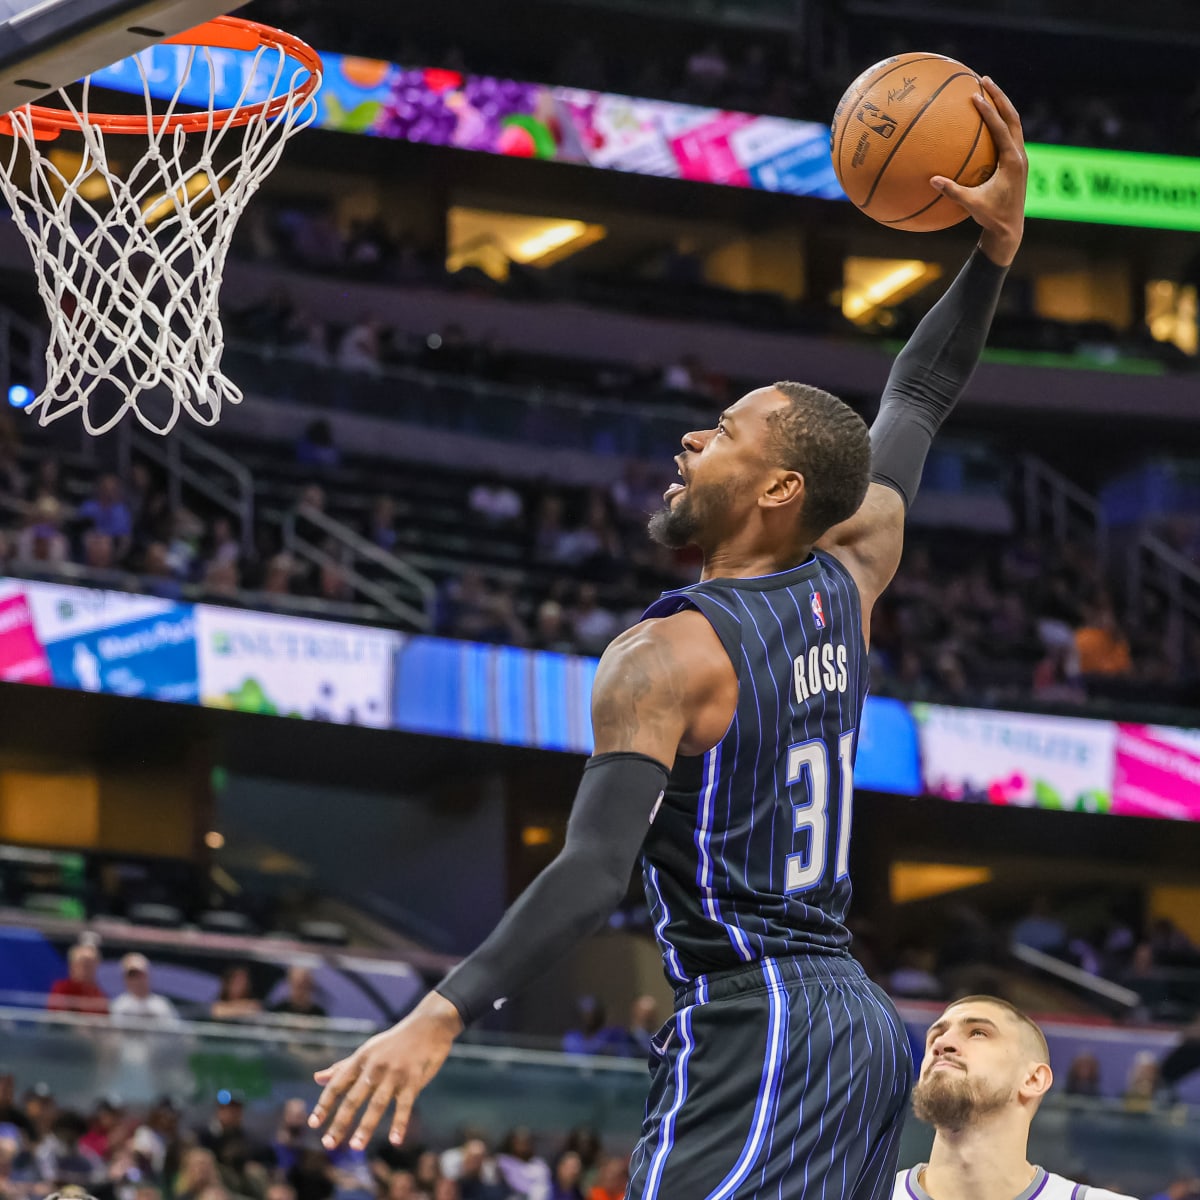 Former Jefferson High star Terrence Ross a source of pride for the